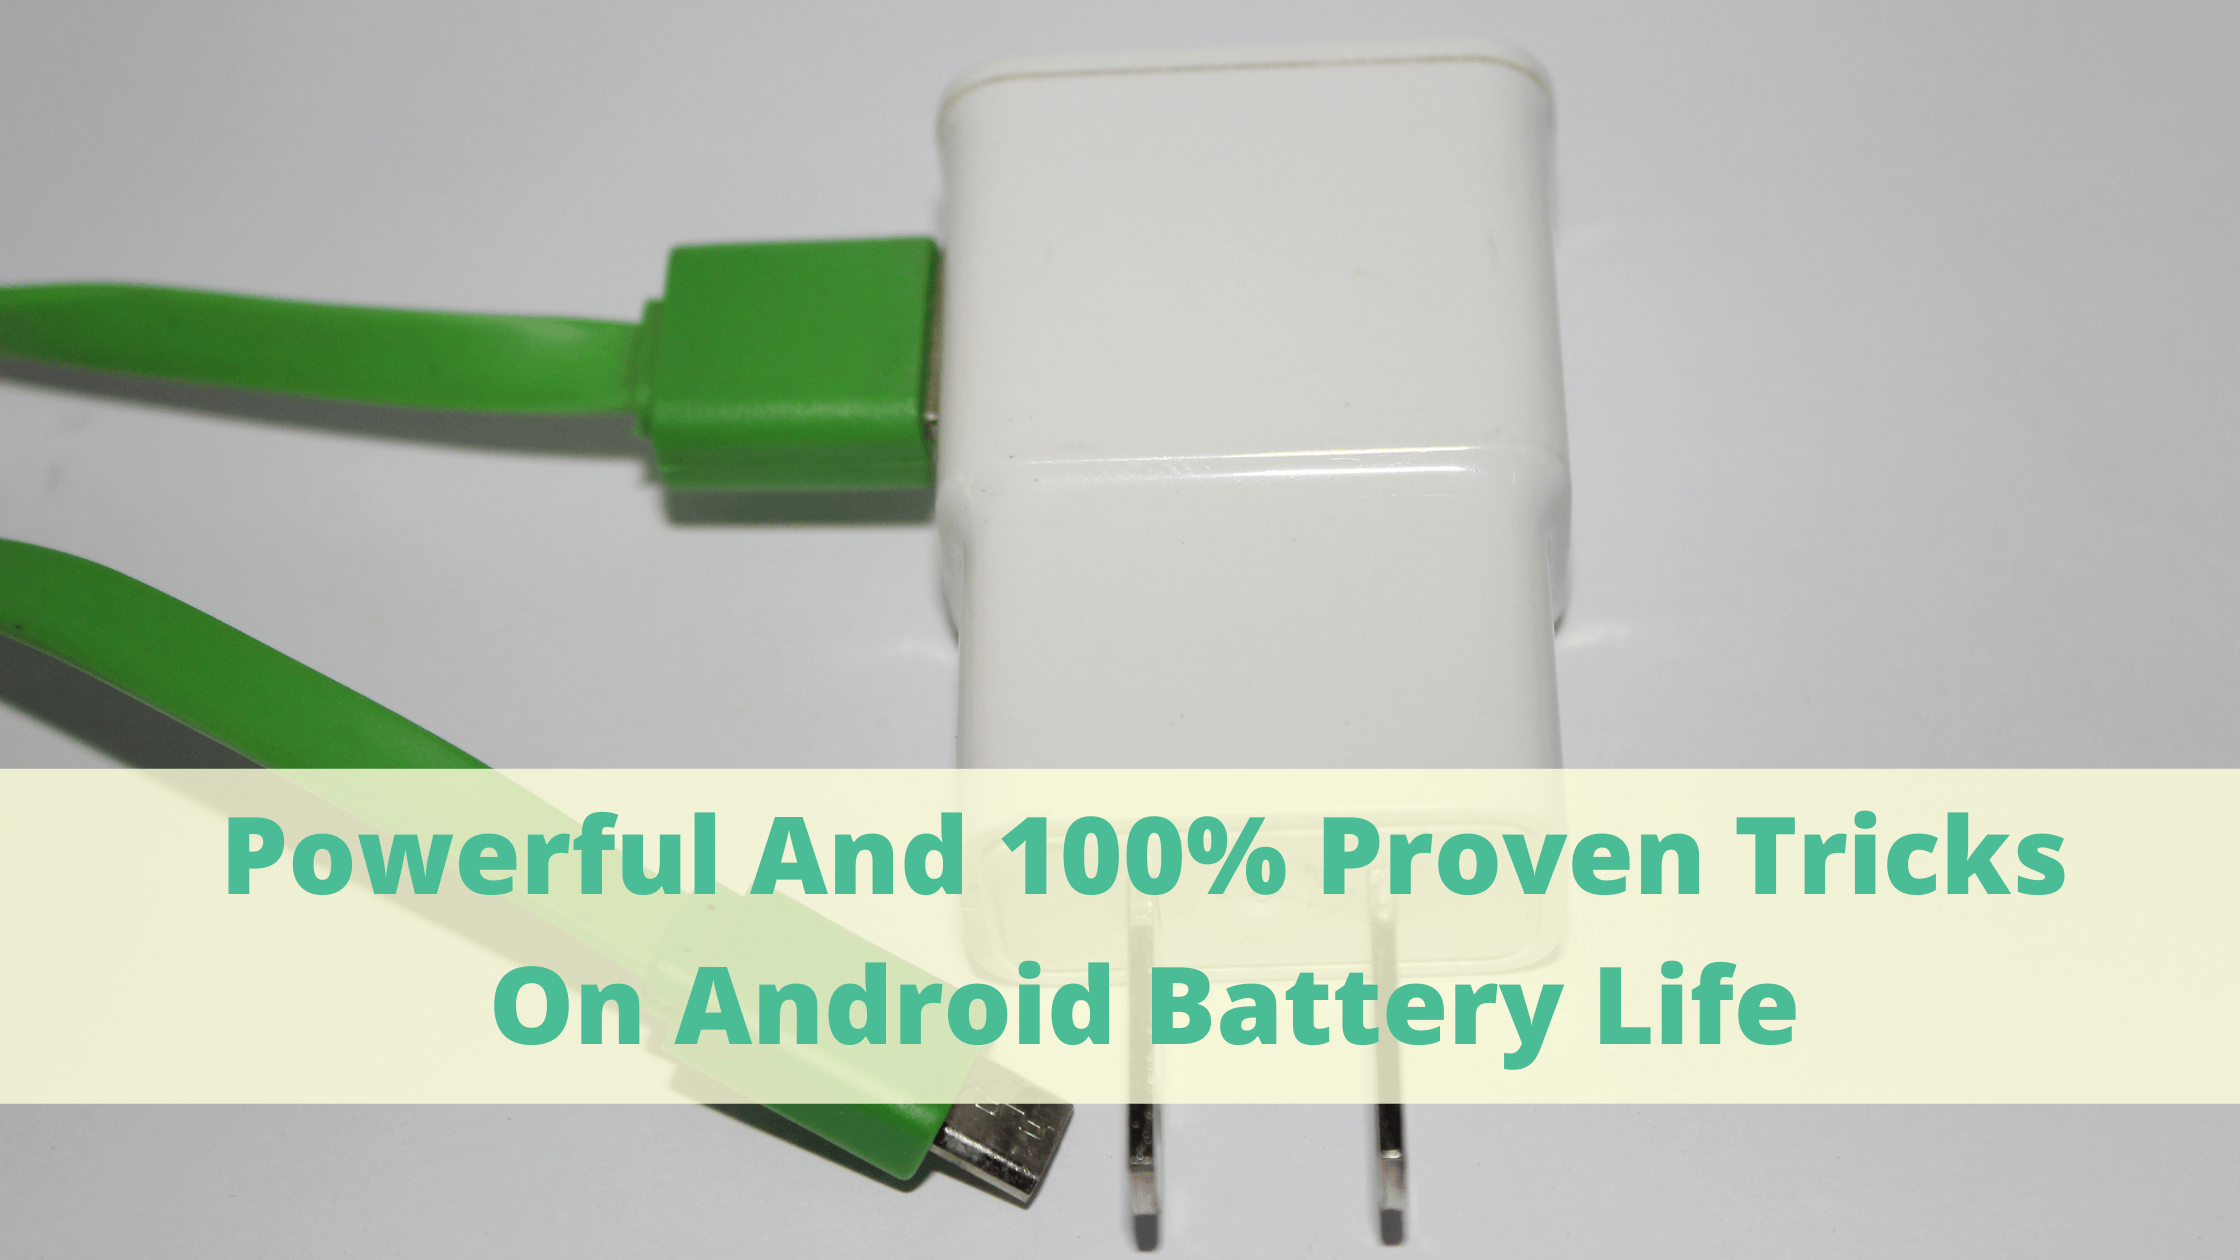 Powerful And 100% Proven Tricks On Android Battery Life